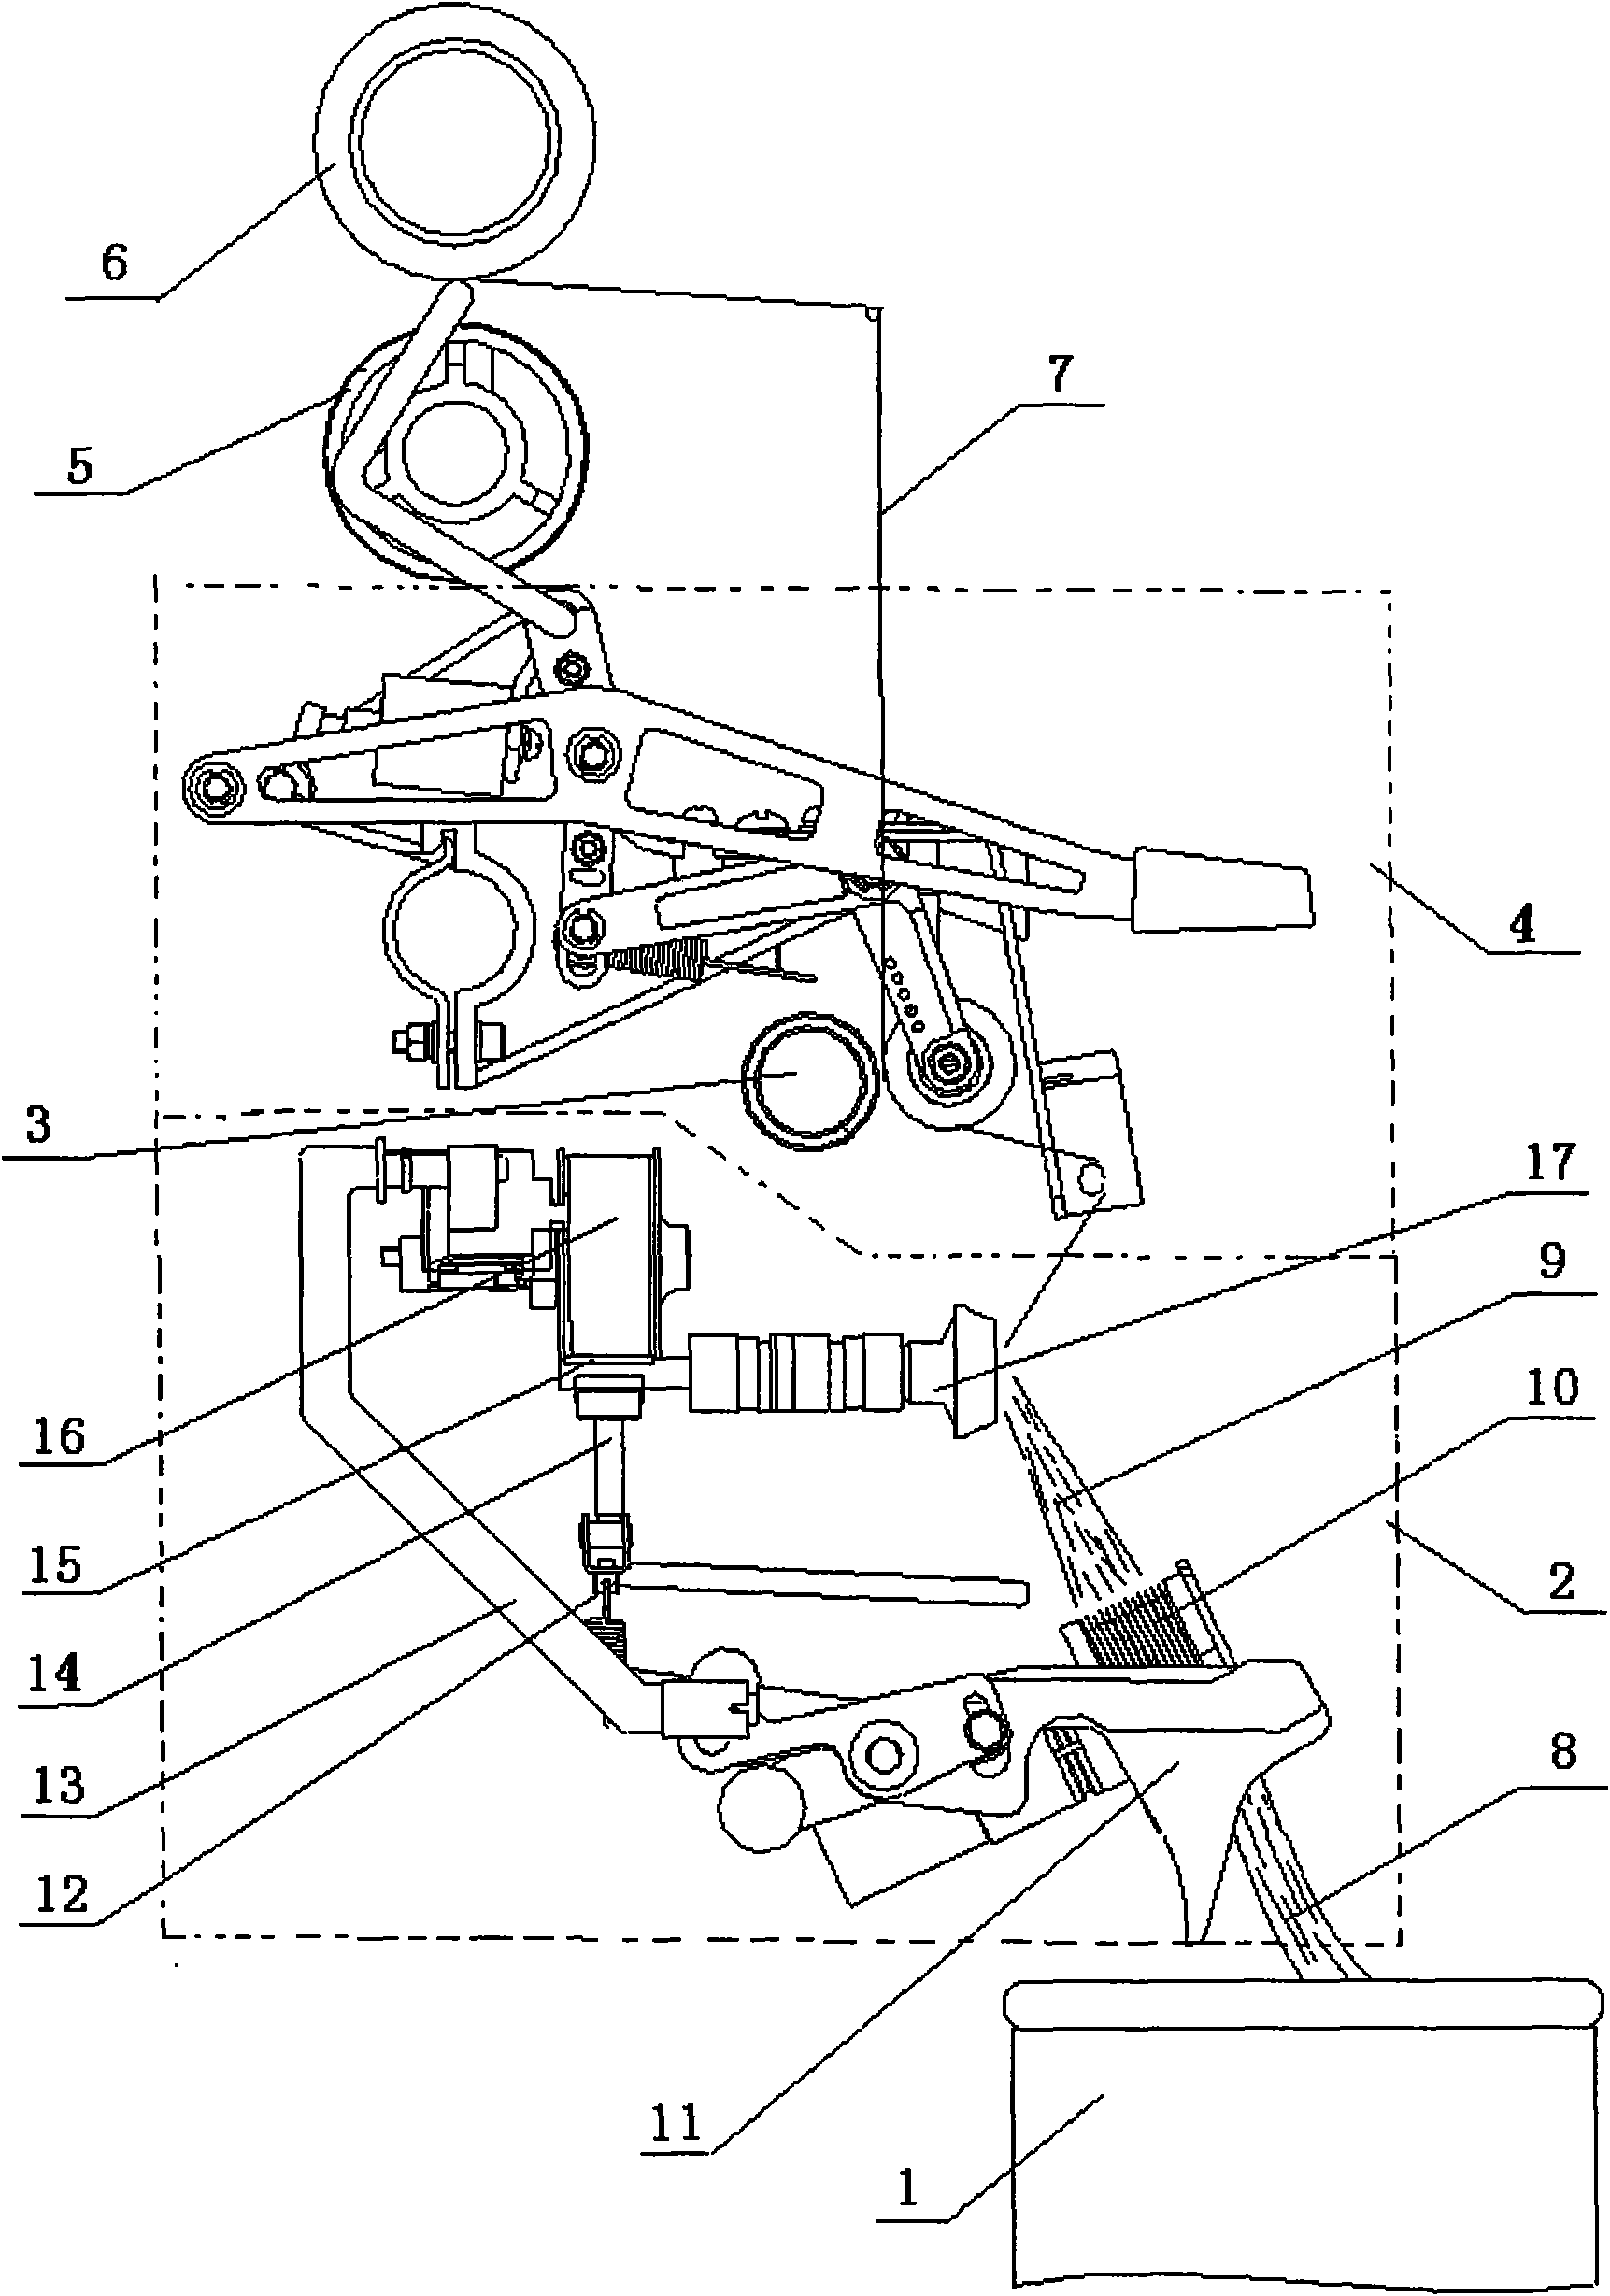 Control mechanism for delay start of spinning device rotor